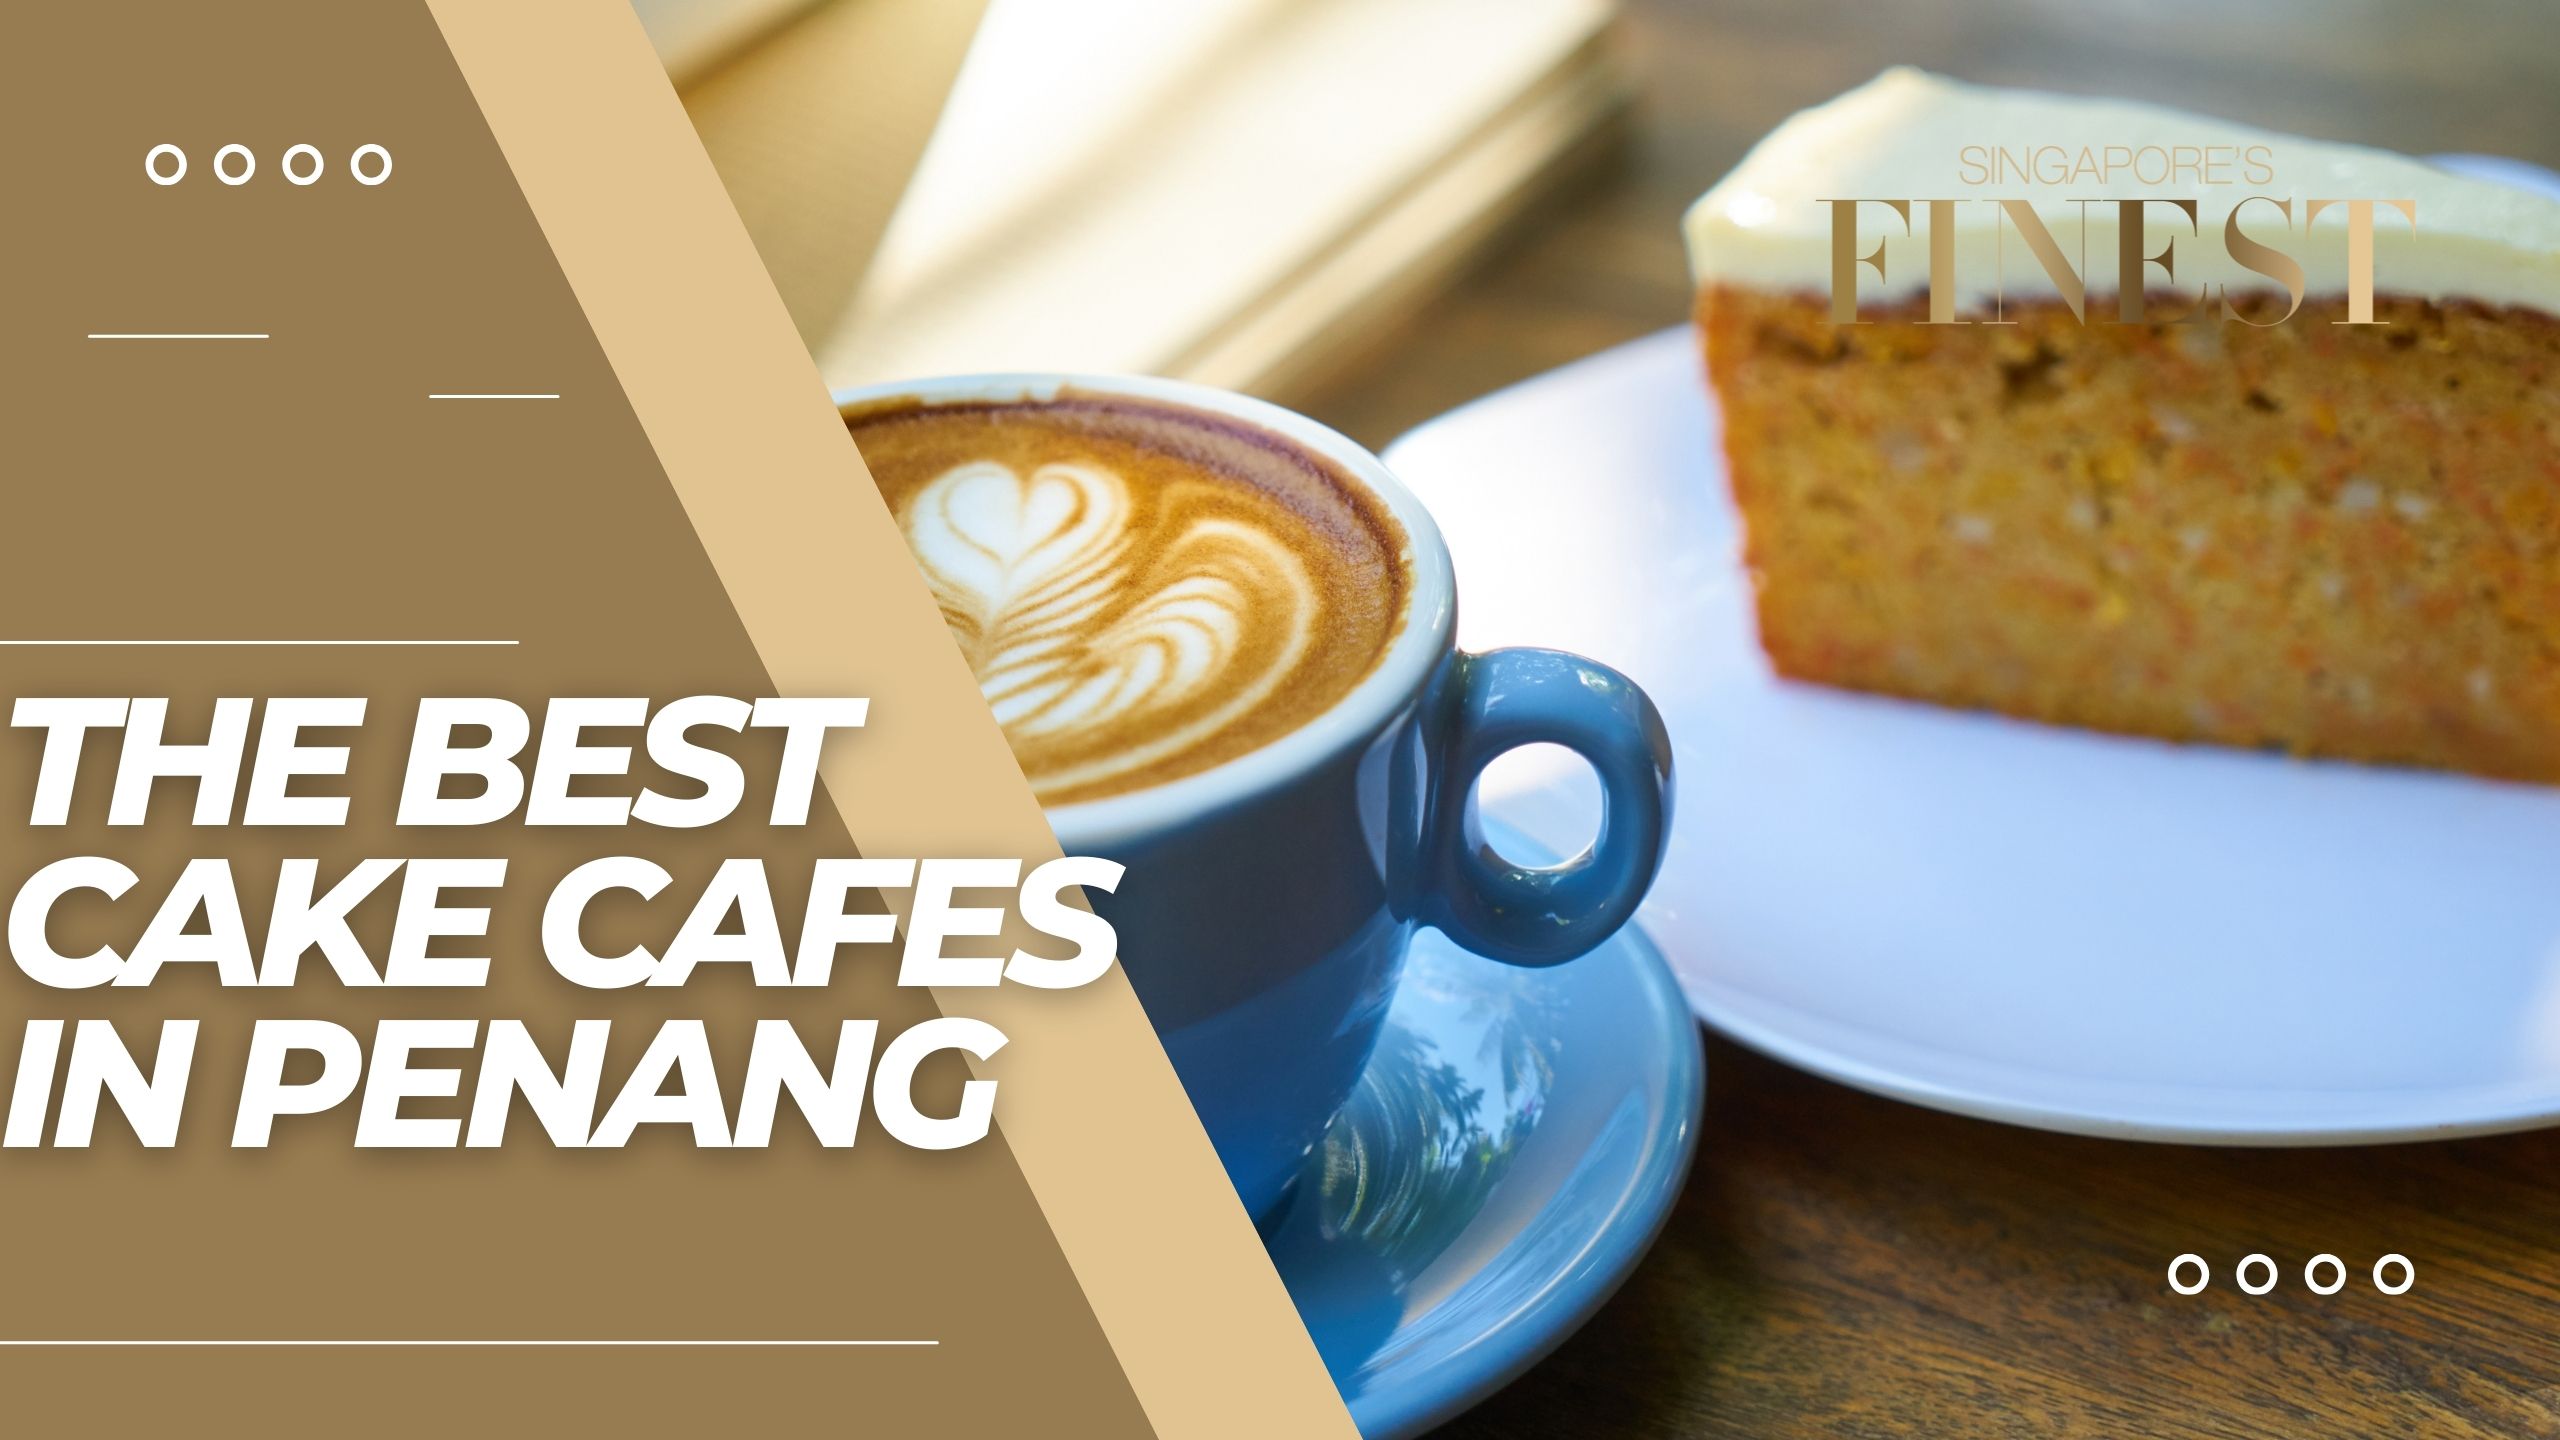 The Finest Cake Cafes in Penang